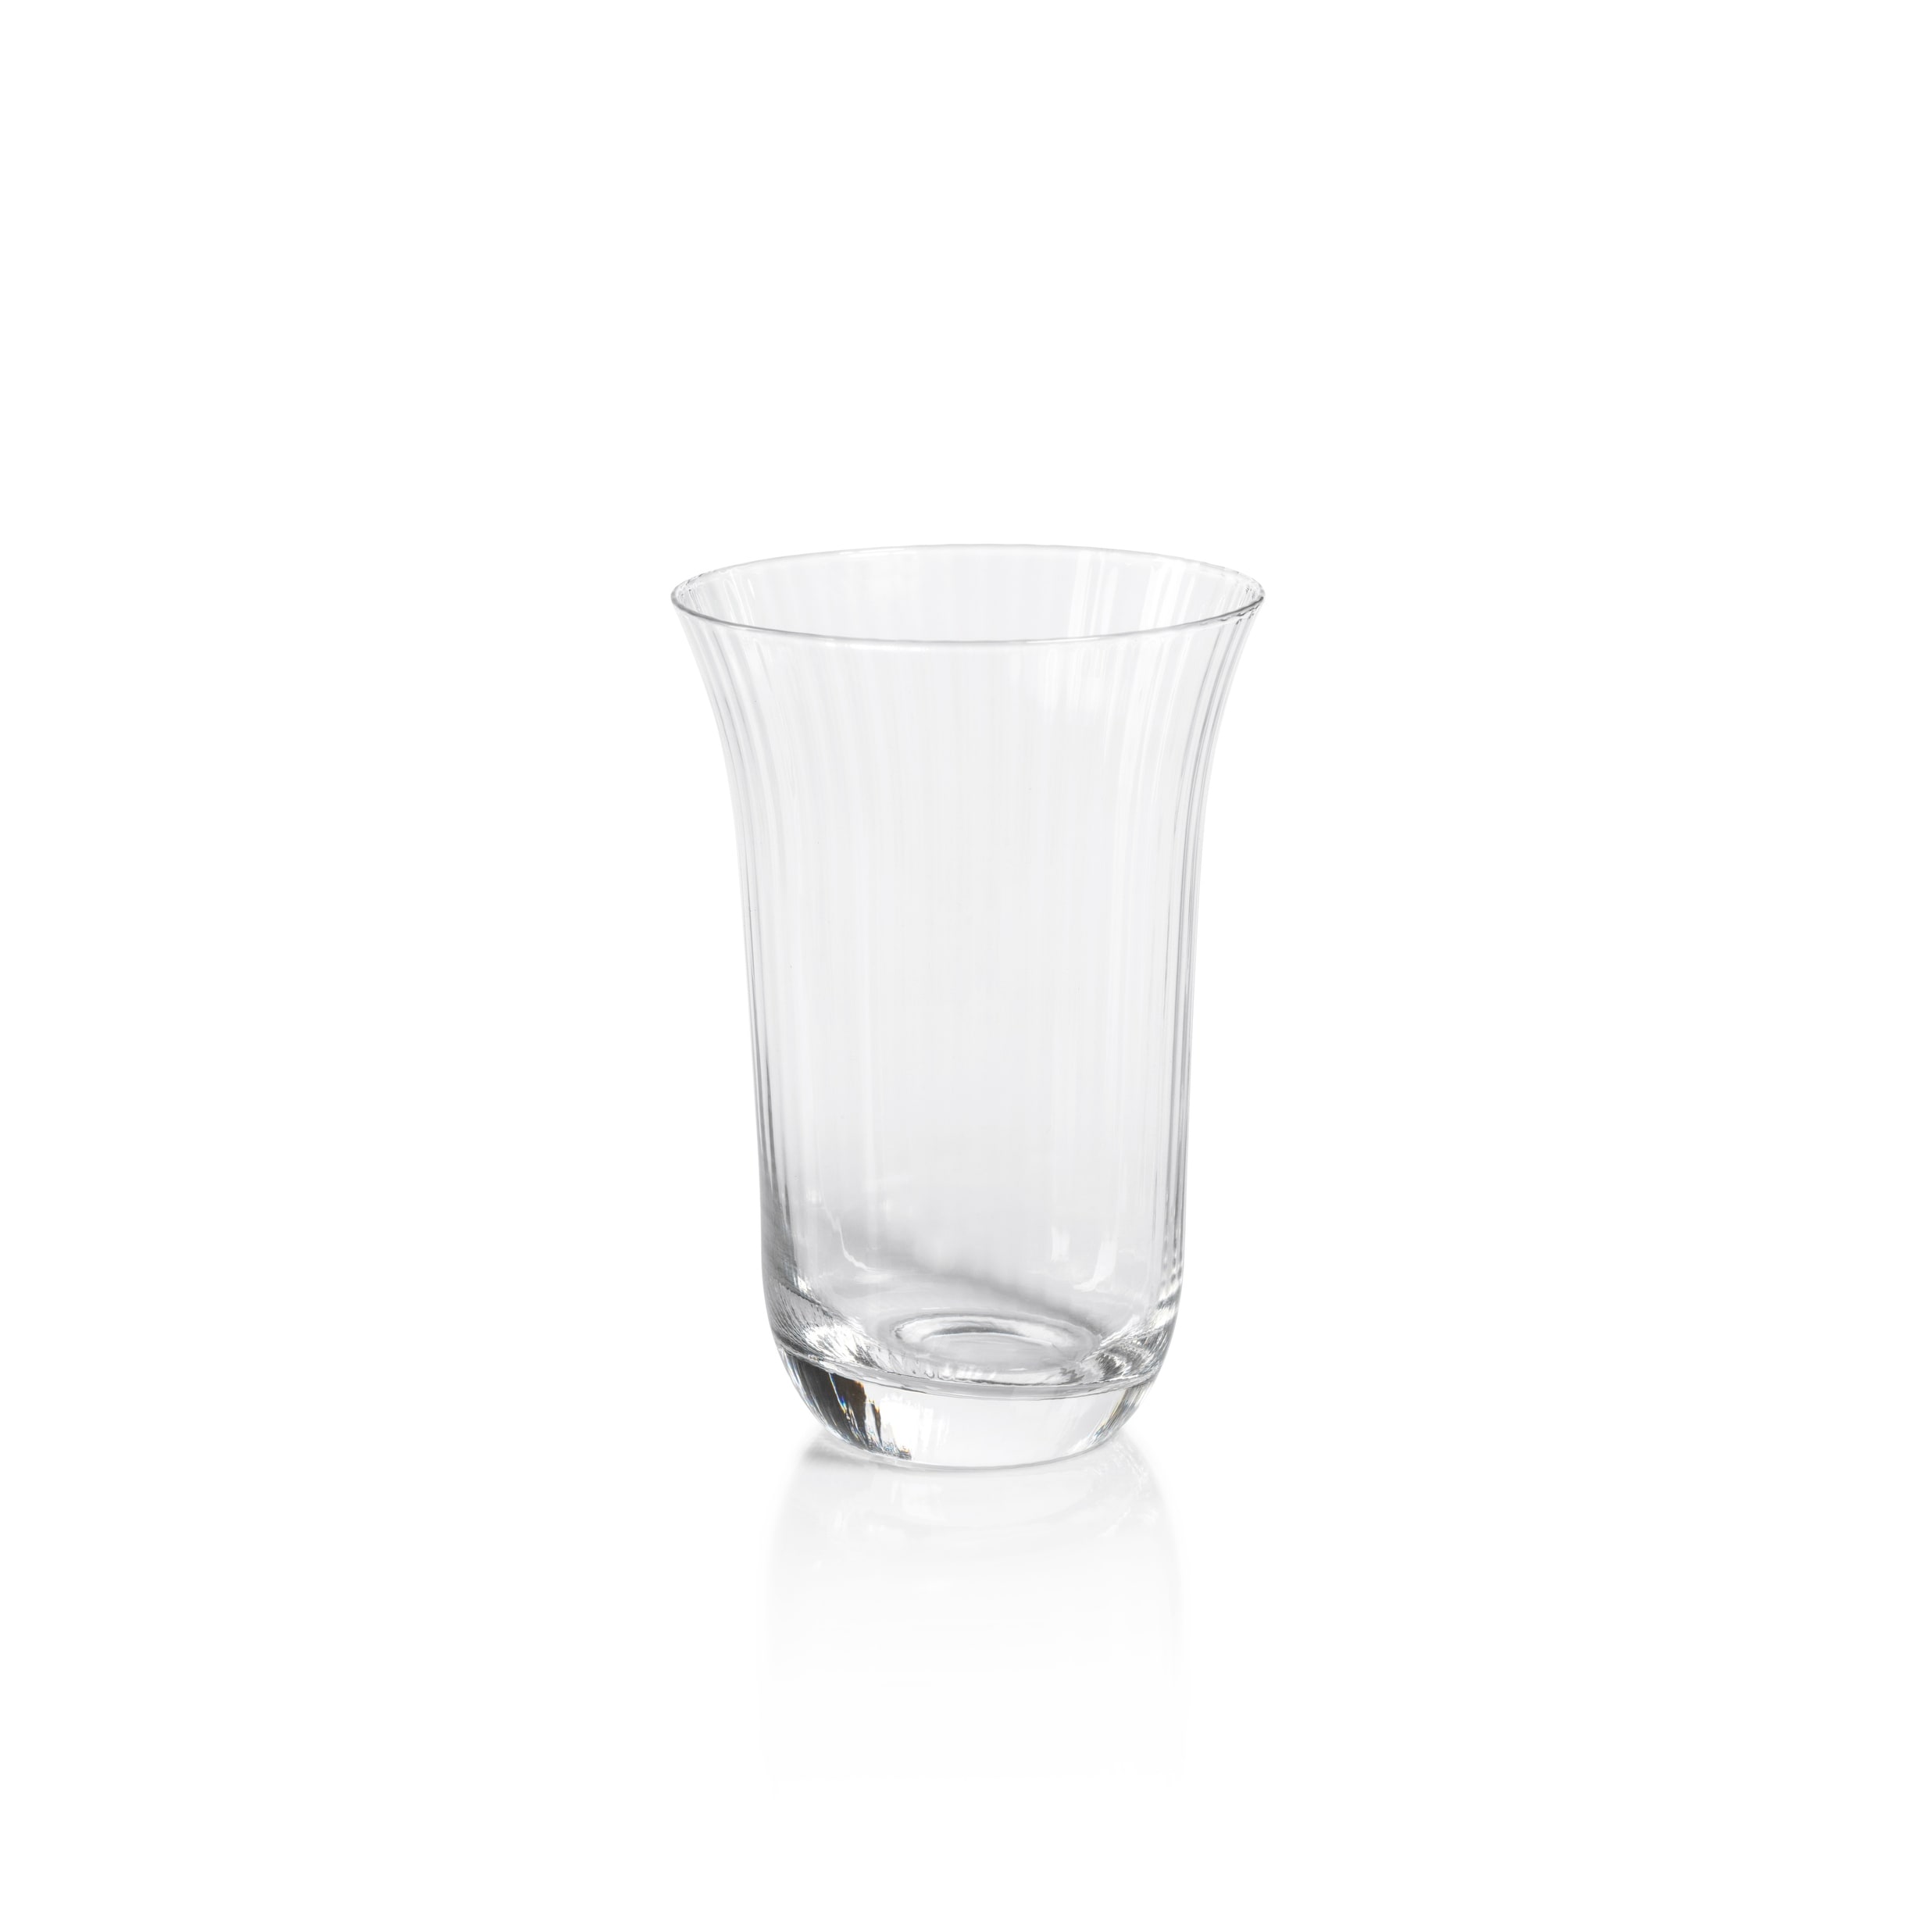 https://ak1.ostkcdn.com/images/products/is/images/direct/a8957df079cf3fa705d621b8b5d70161b8d04d03/Kenley-Clear-Optic-Highball-Glasses%2C-Set-of-4.jpg